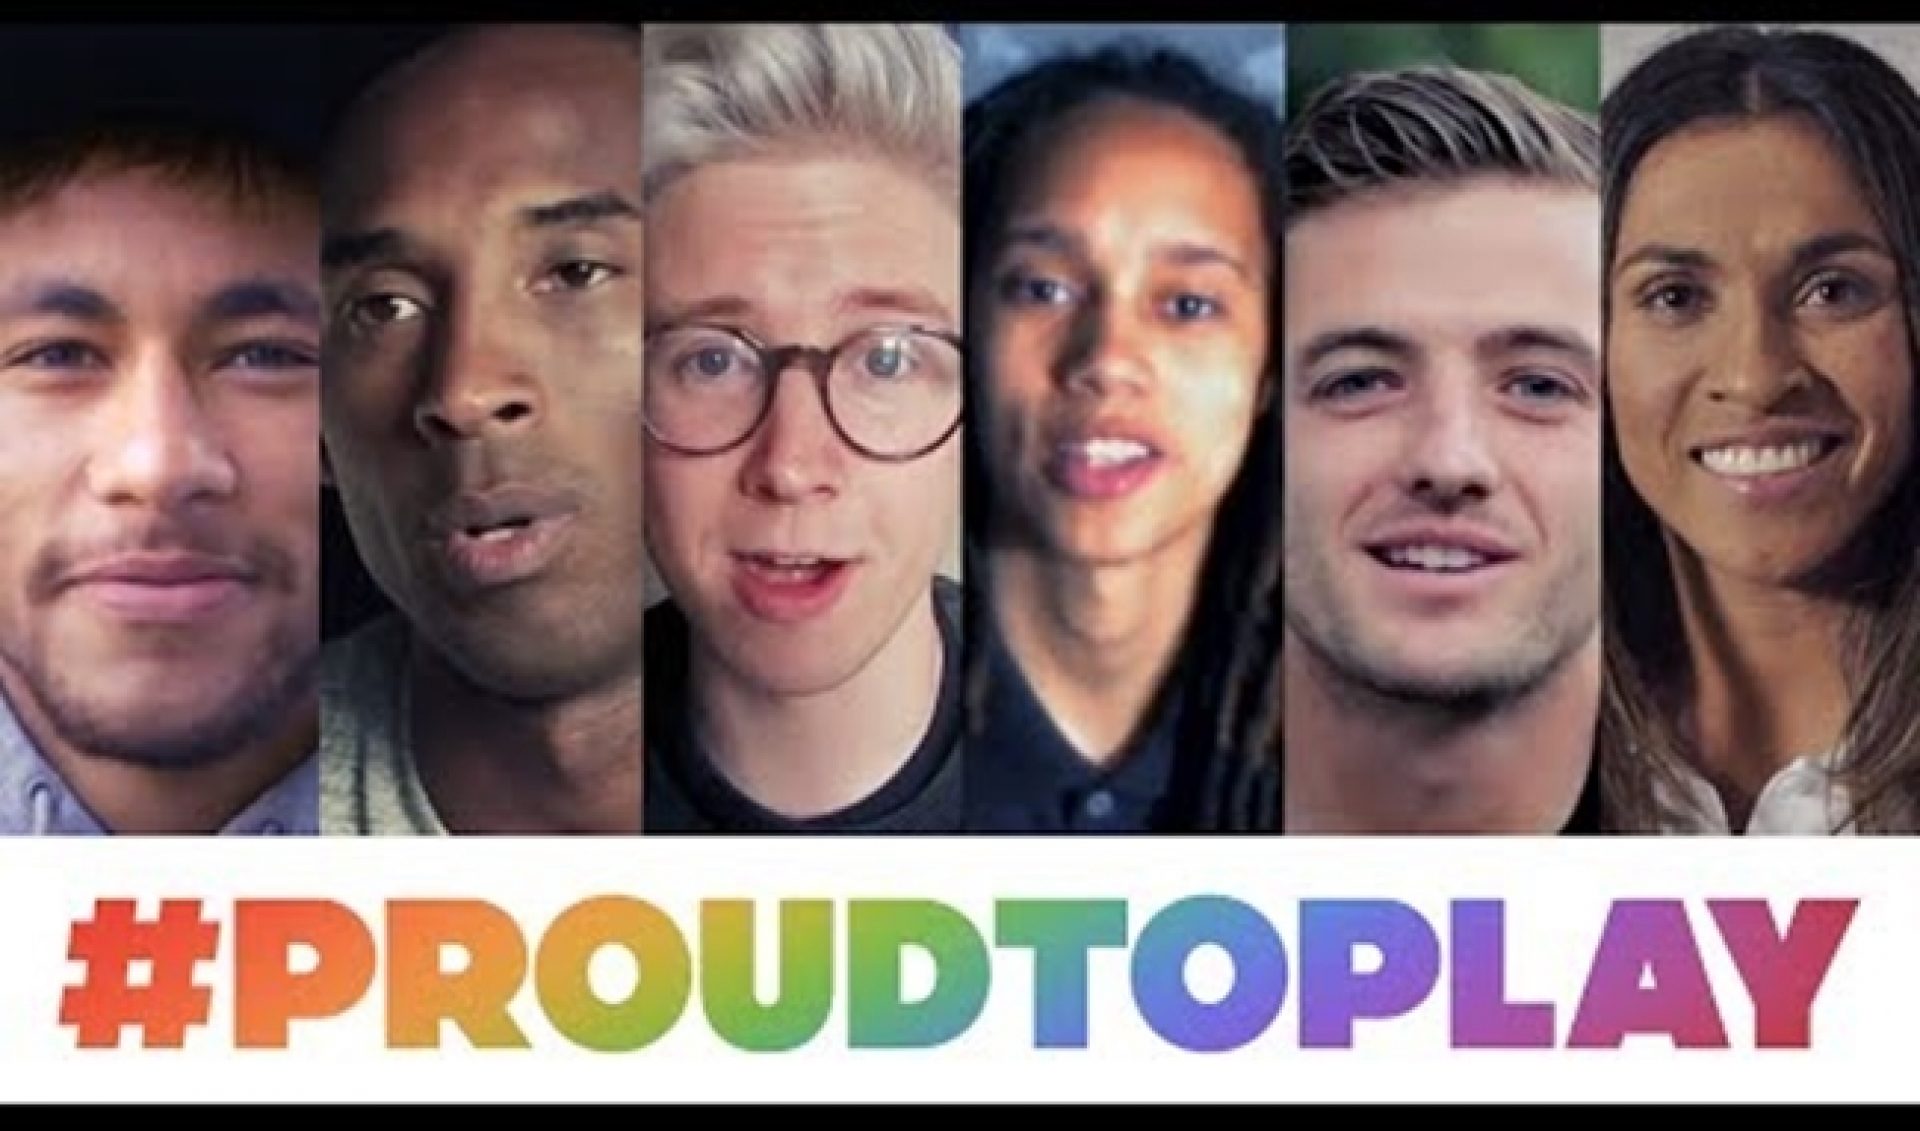 YouTube Salutes LGBT Athletes With #ProudToPlay Campaign